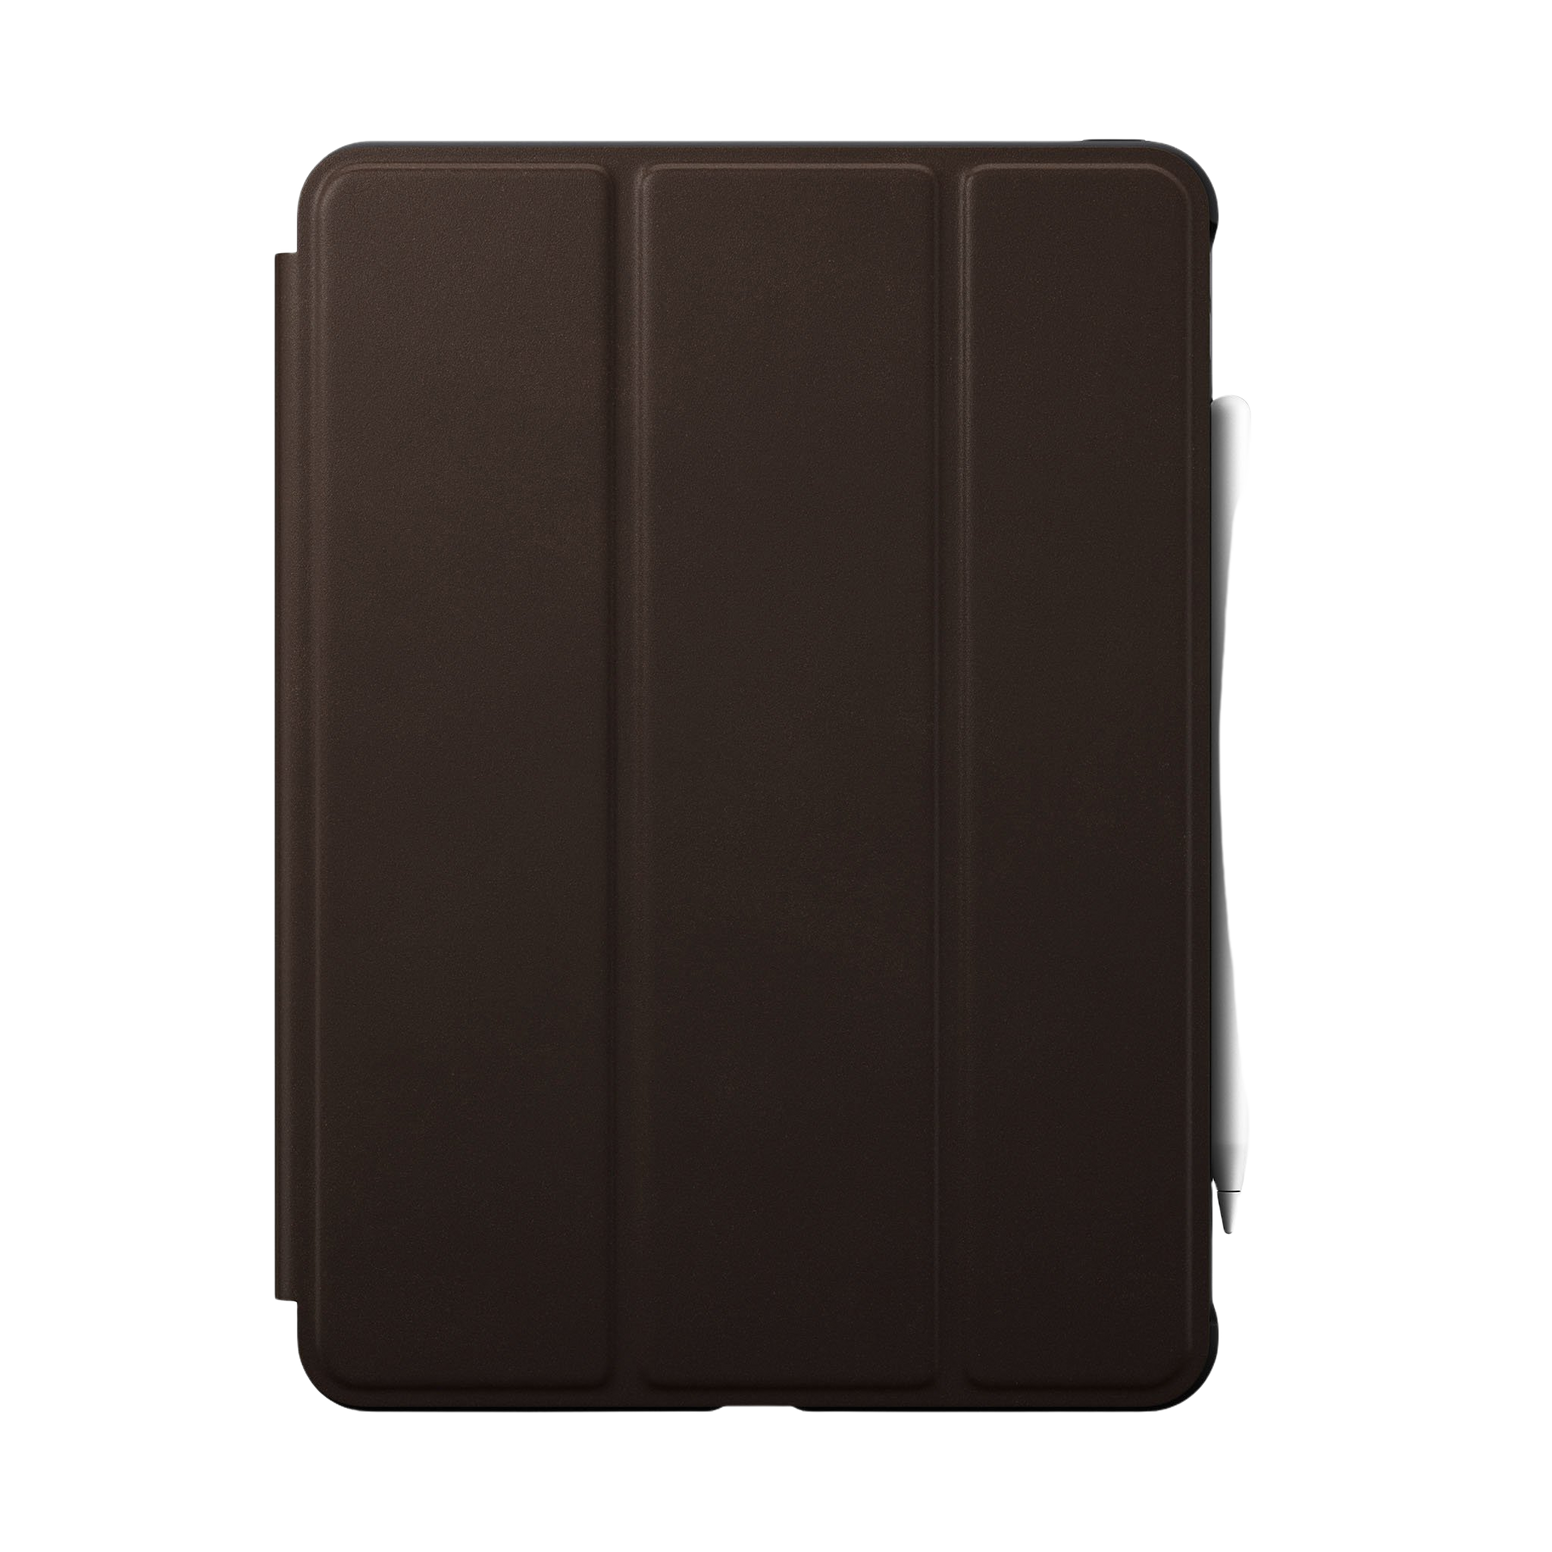 Nomad Rugged Folio for iPad Pro 11" (2nd Gen) - Horween Leather - Rustic Brown